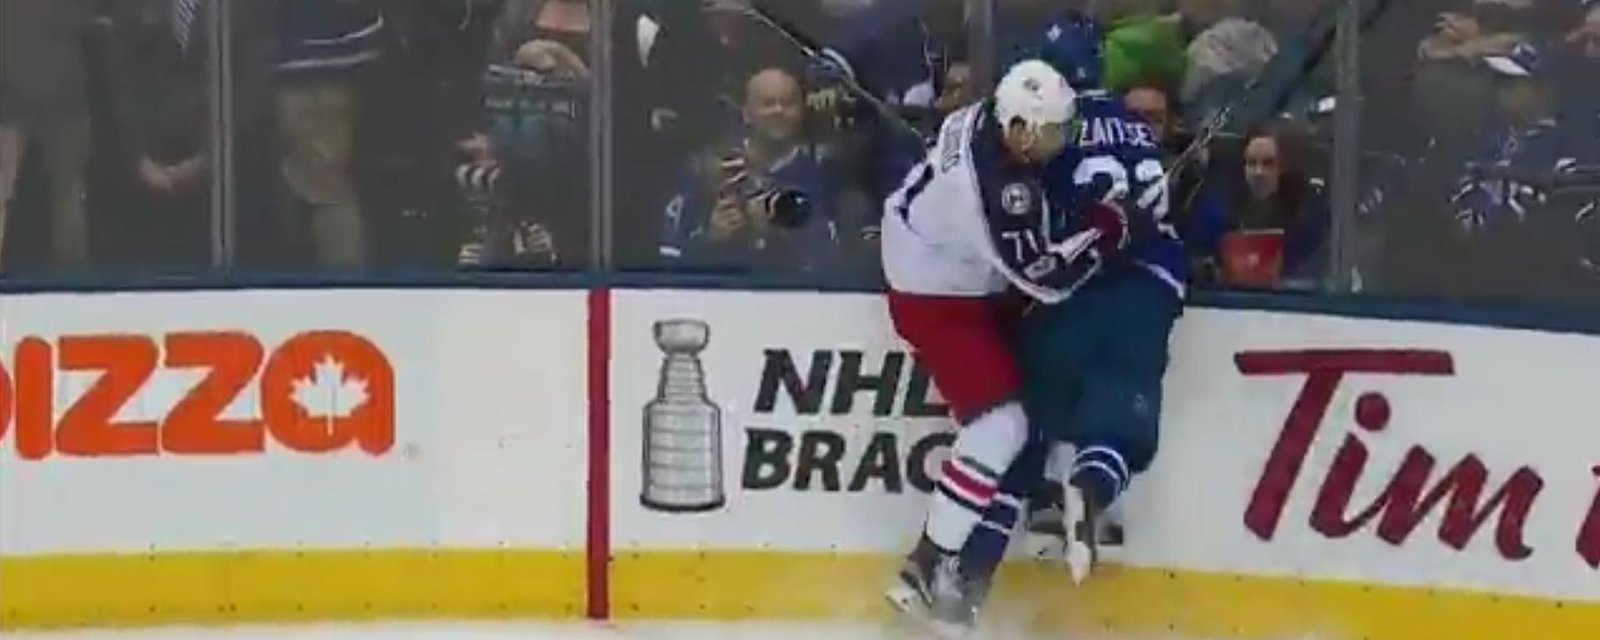 BREAKING : Zaitsev out after huge hit by Foligno. 